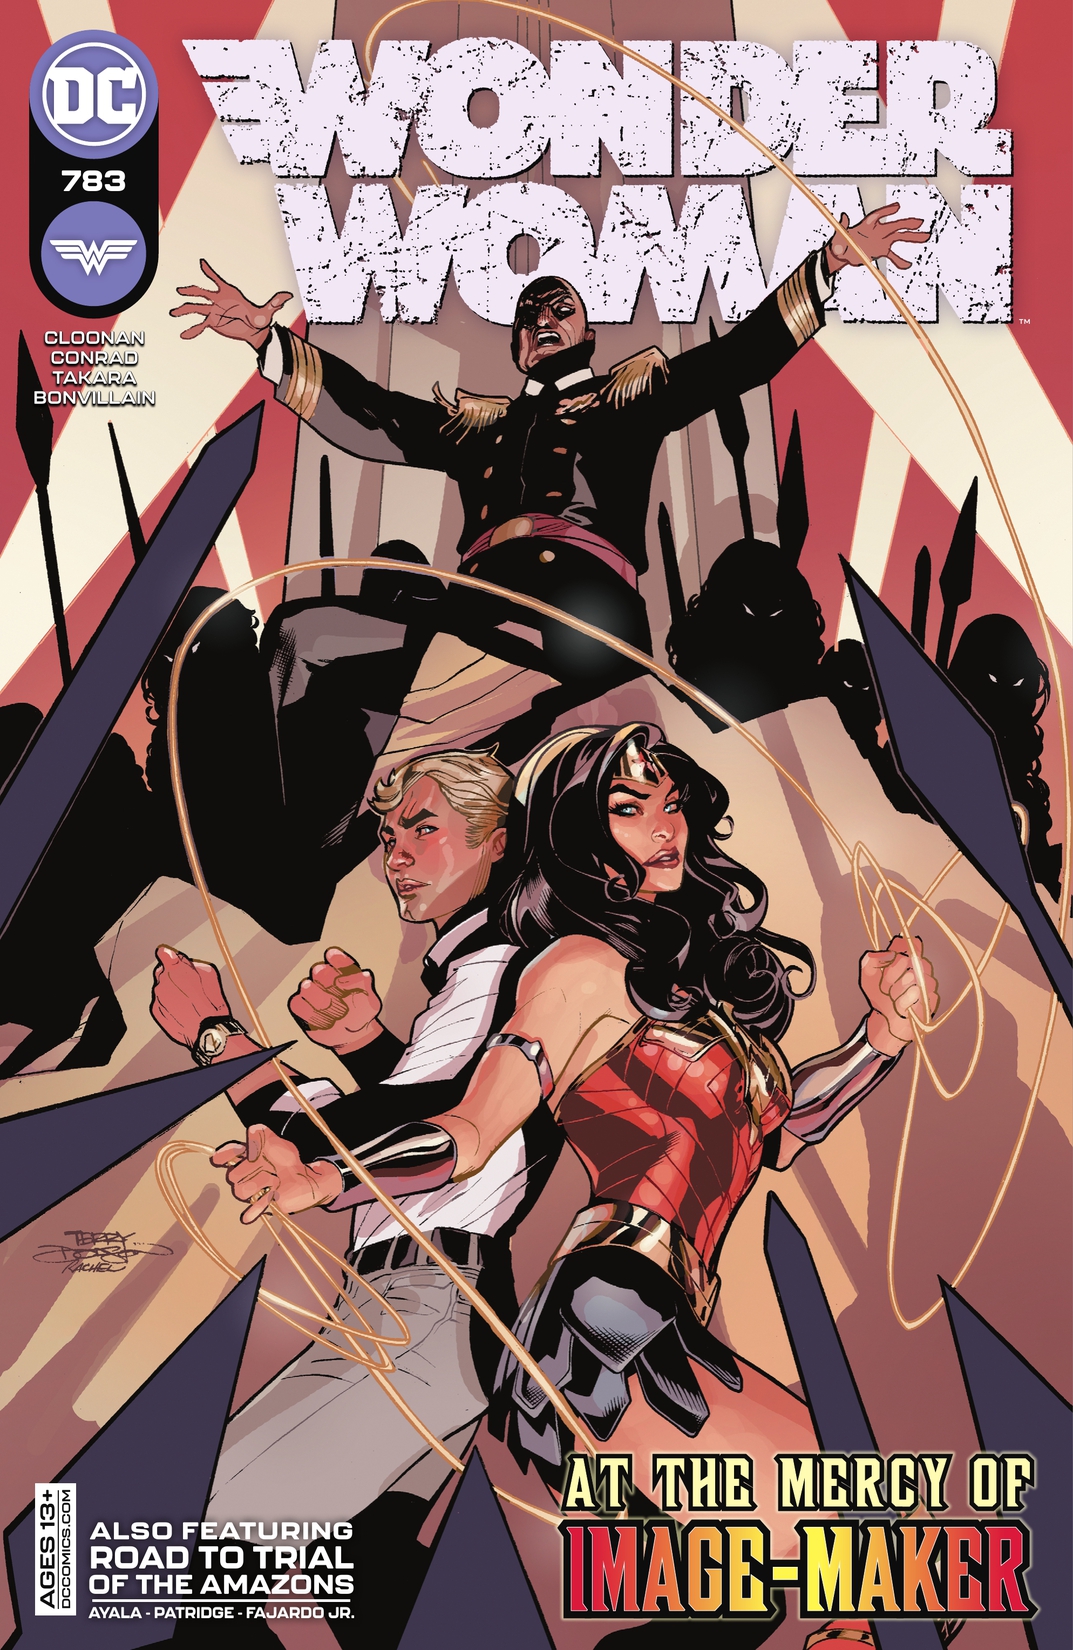 Wonder Woman (2016-) #783 preview images